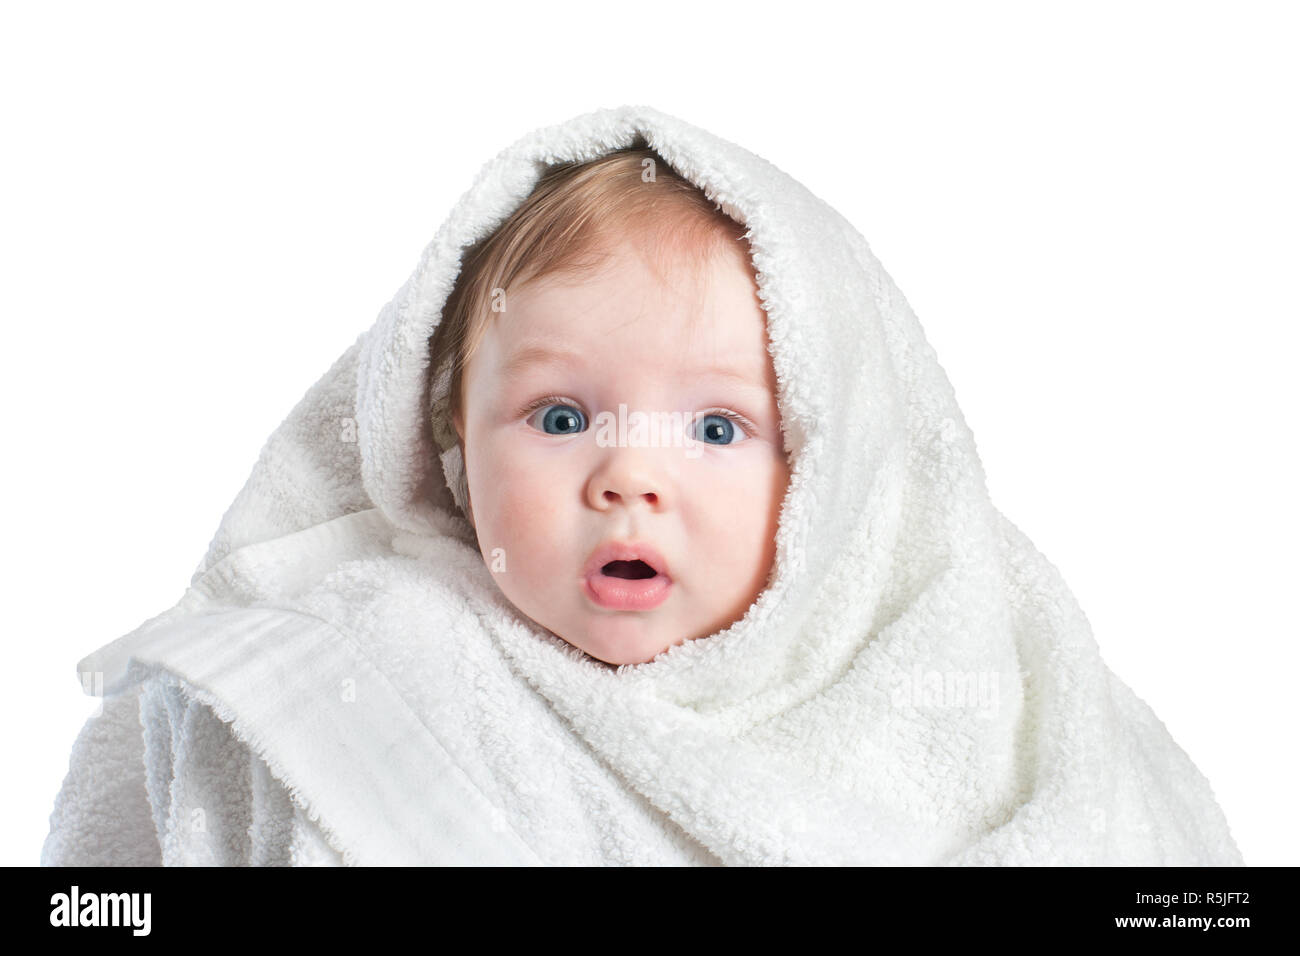 Cute surprised Baby in fluffy towel after bathing isolated on white background. Concept of hygiene, childcare. Stock Photo